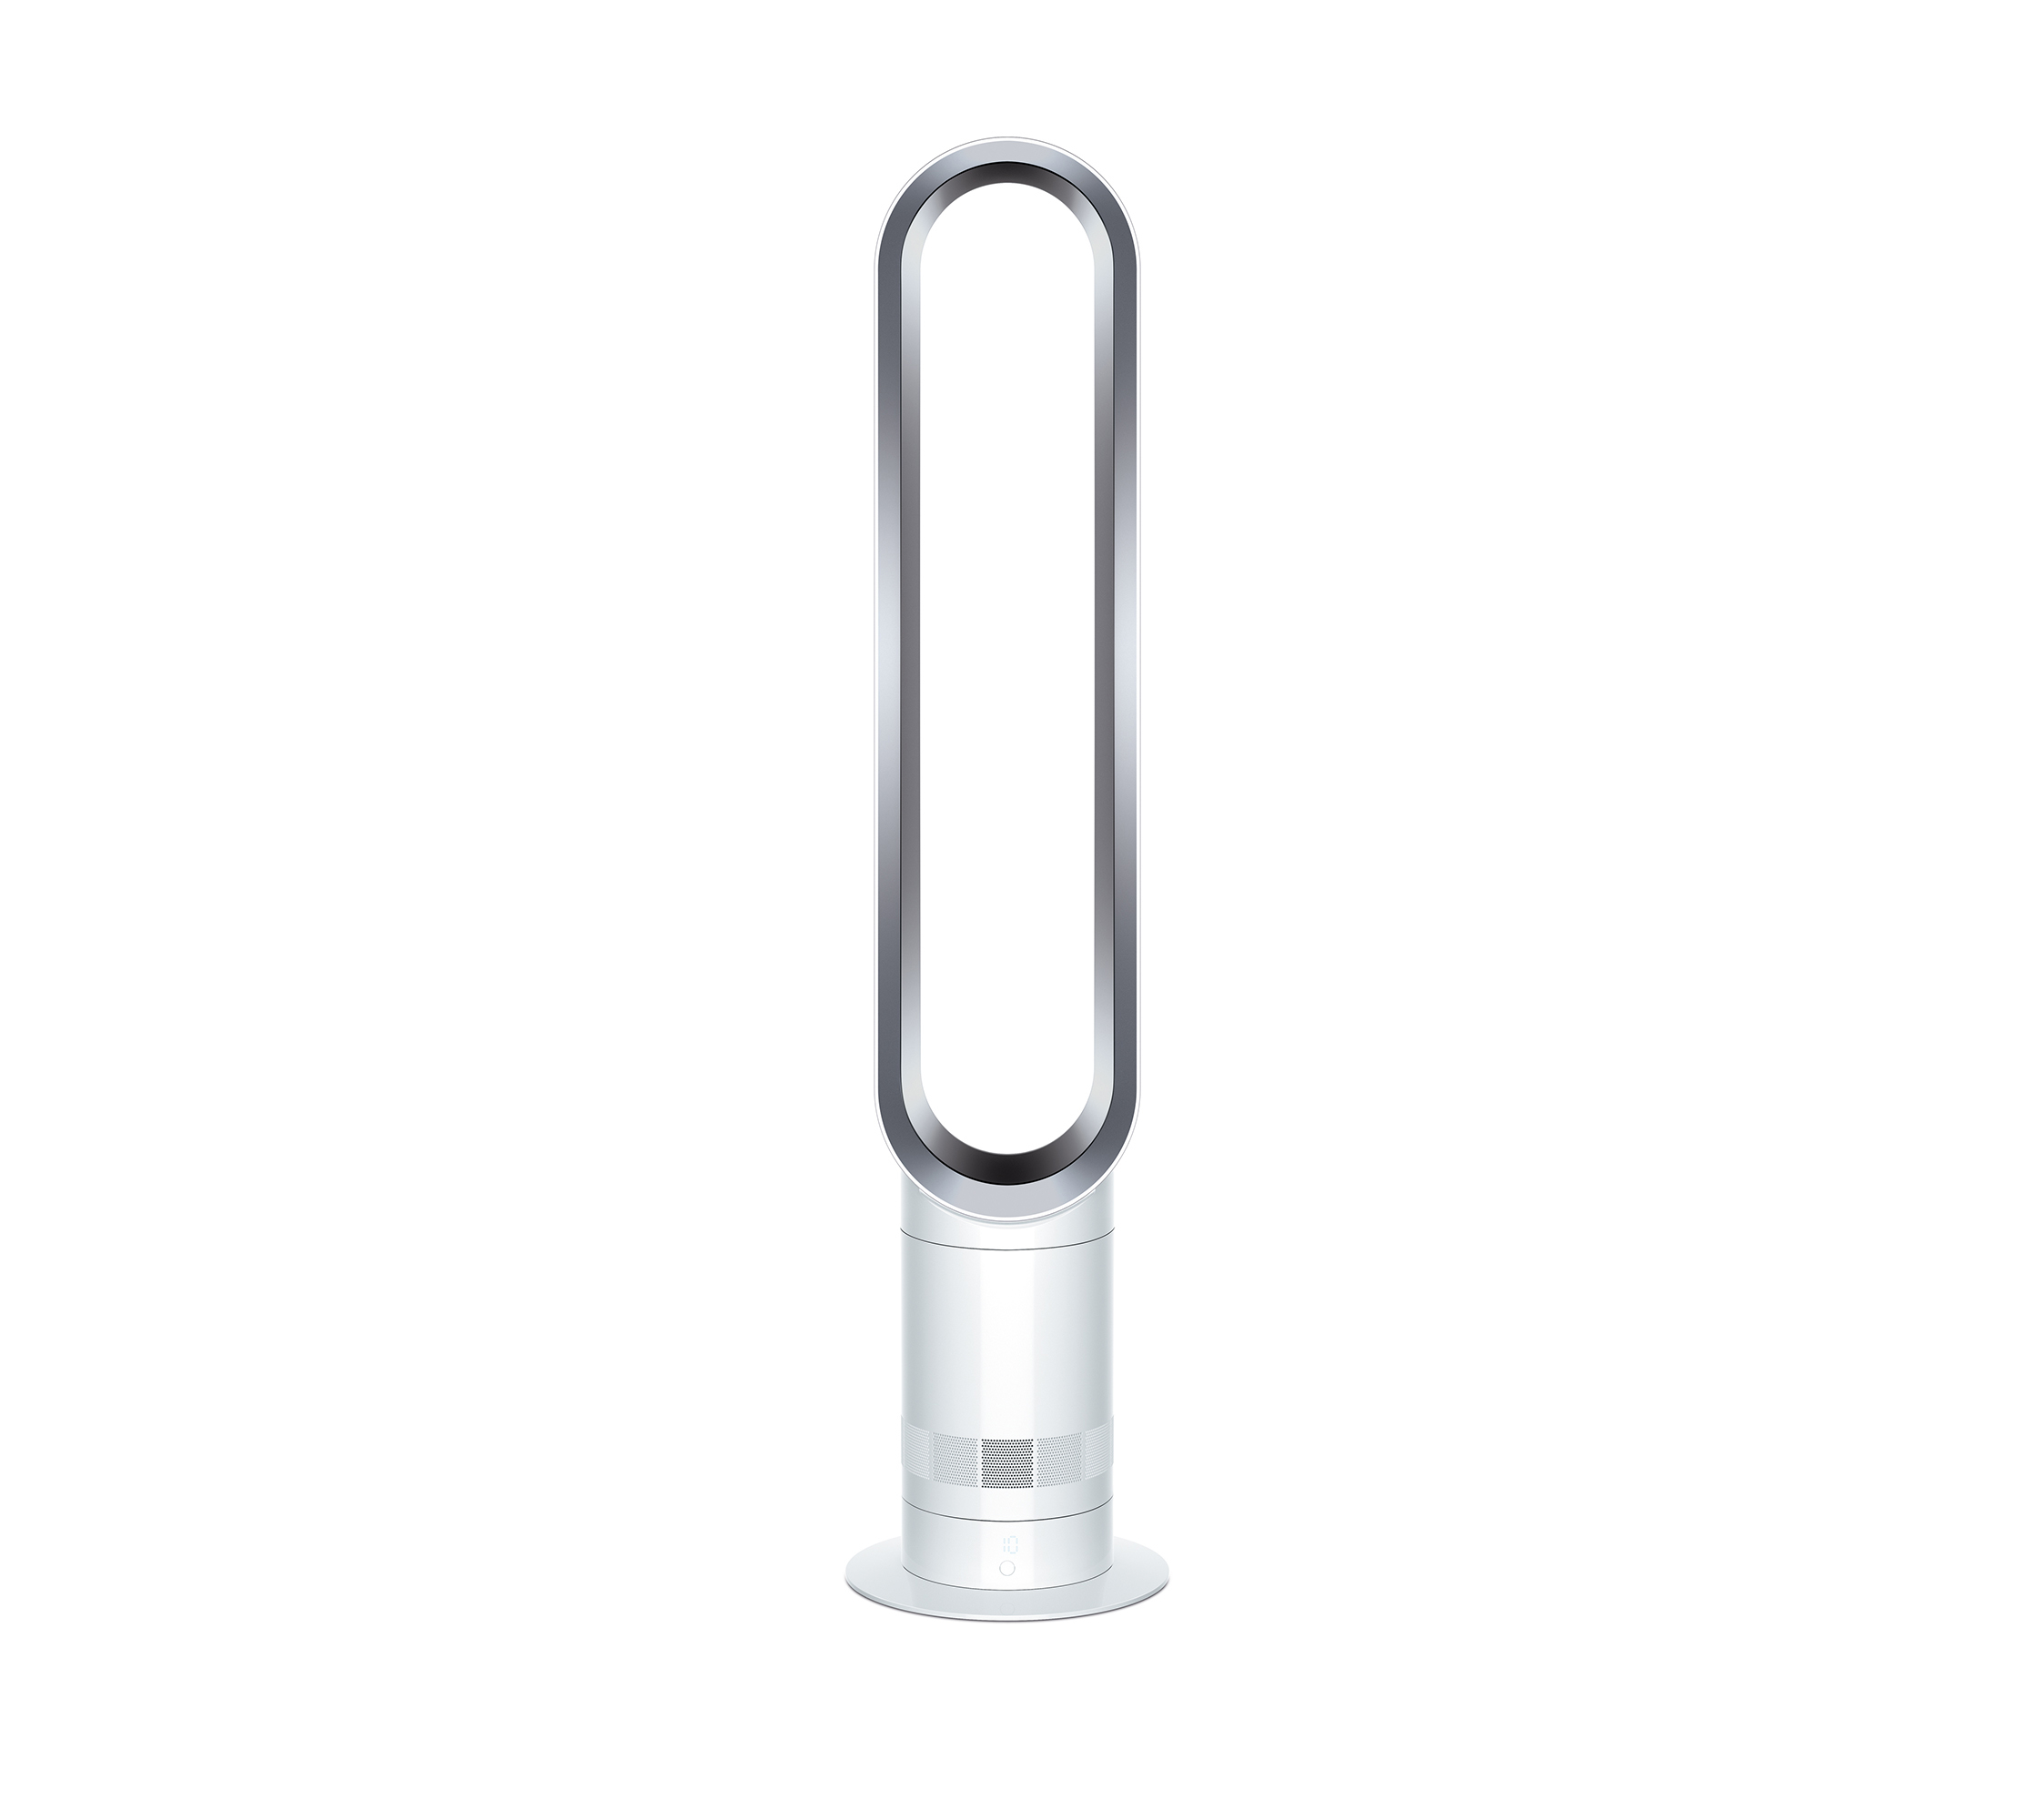 Details About Dyson Cool Am07 Tower Fan Whitesilver Refurbished 1 Year Guarantee for measurements 2222 X 2000